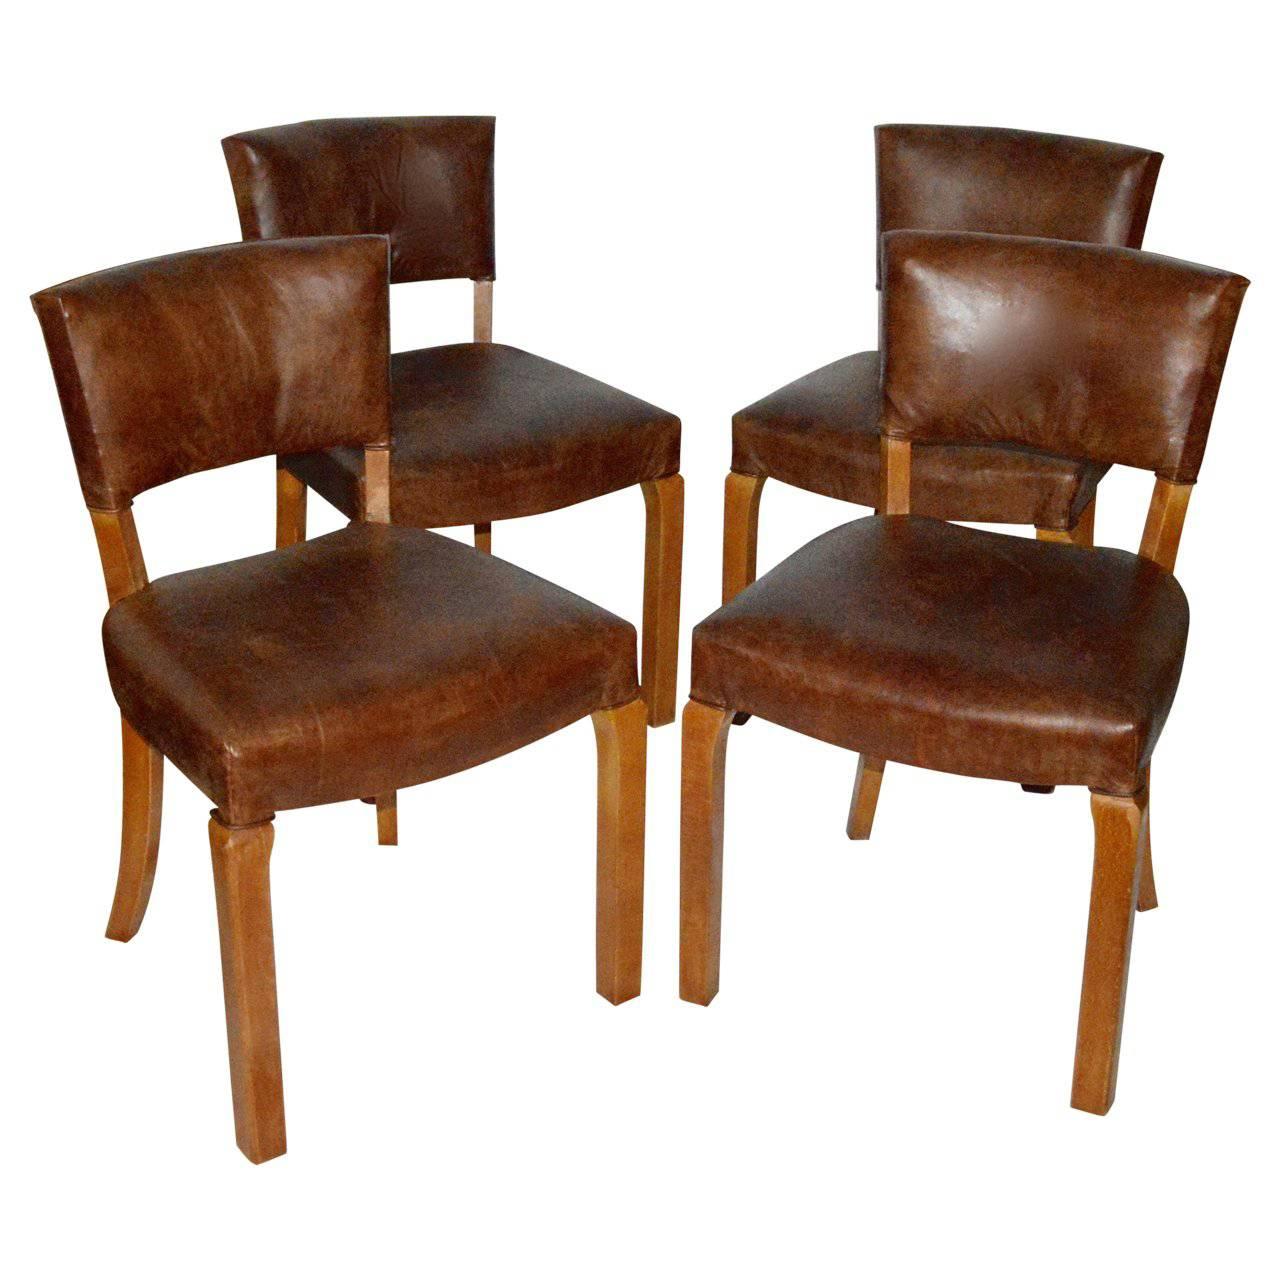 20th Century Art Deco Leather Dining Chairs